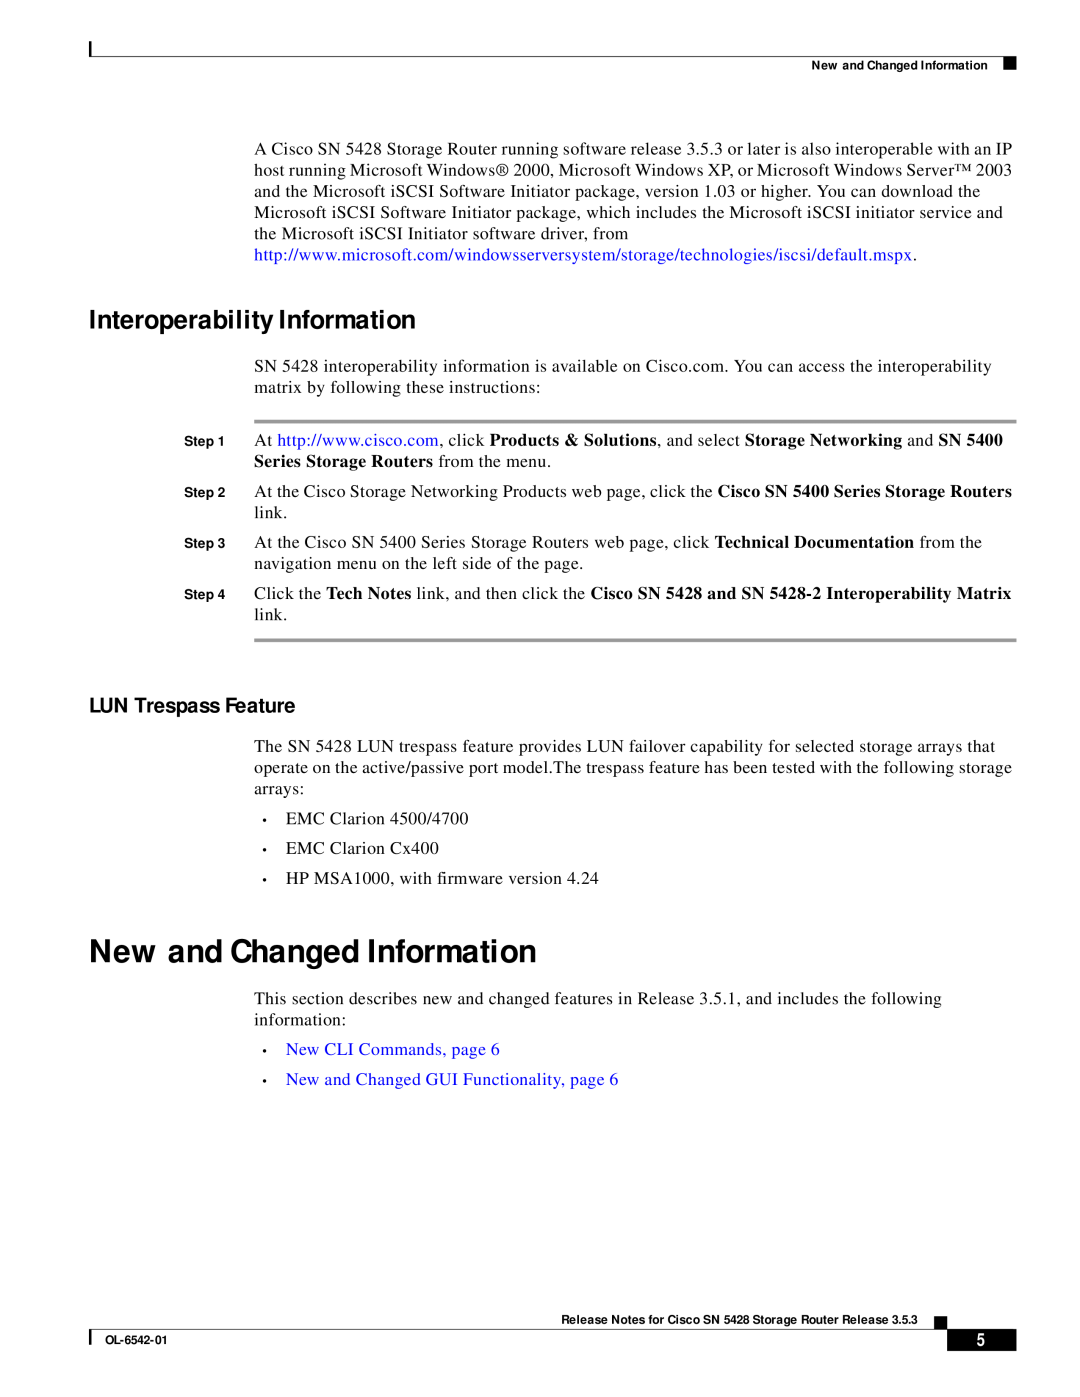 Cisco Systems SN 5428 manual New and Changed Information, Interoperability Information, LUN Trespass Feature 